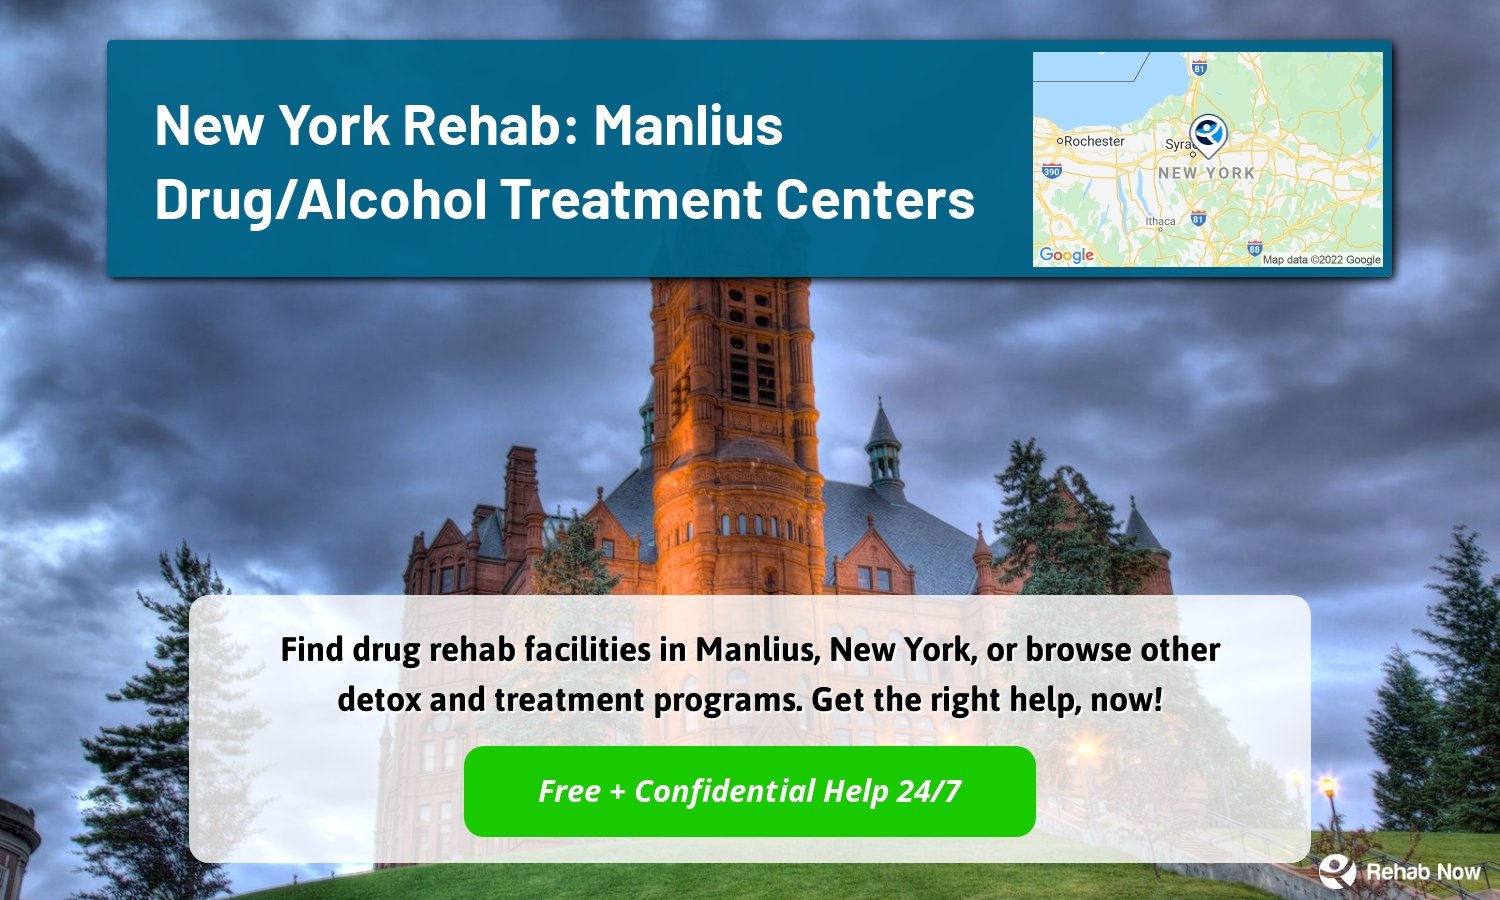 Find drug rehab facilities in Manlius, New York, or browse other detox and treatment programs. Get the right help, now!